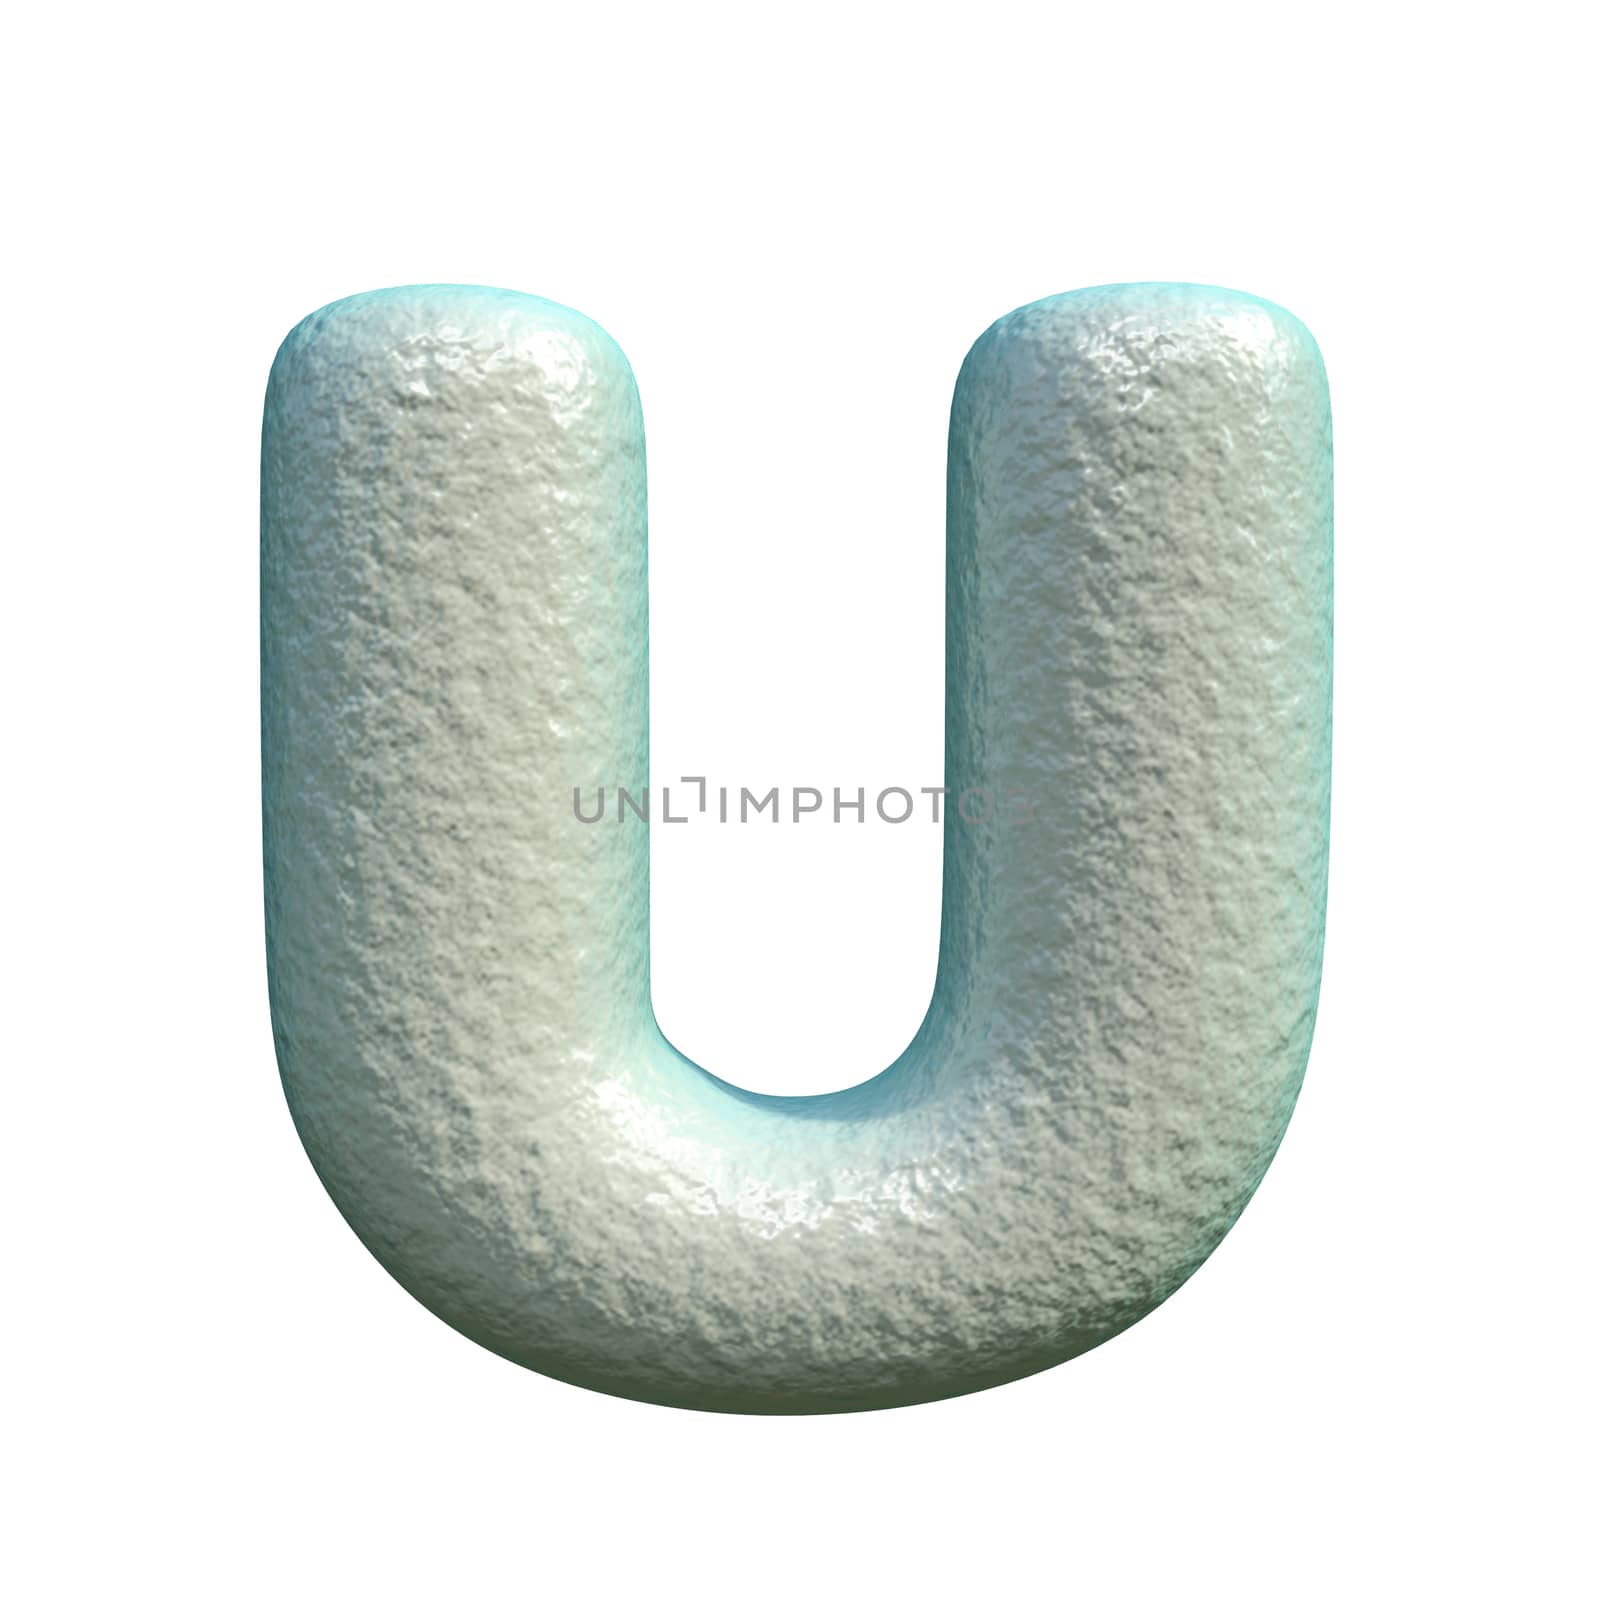 Grey blue clay font Letter U 3D by djmilic